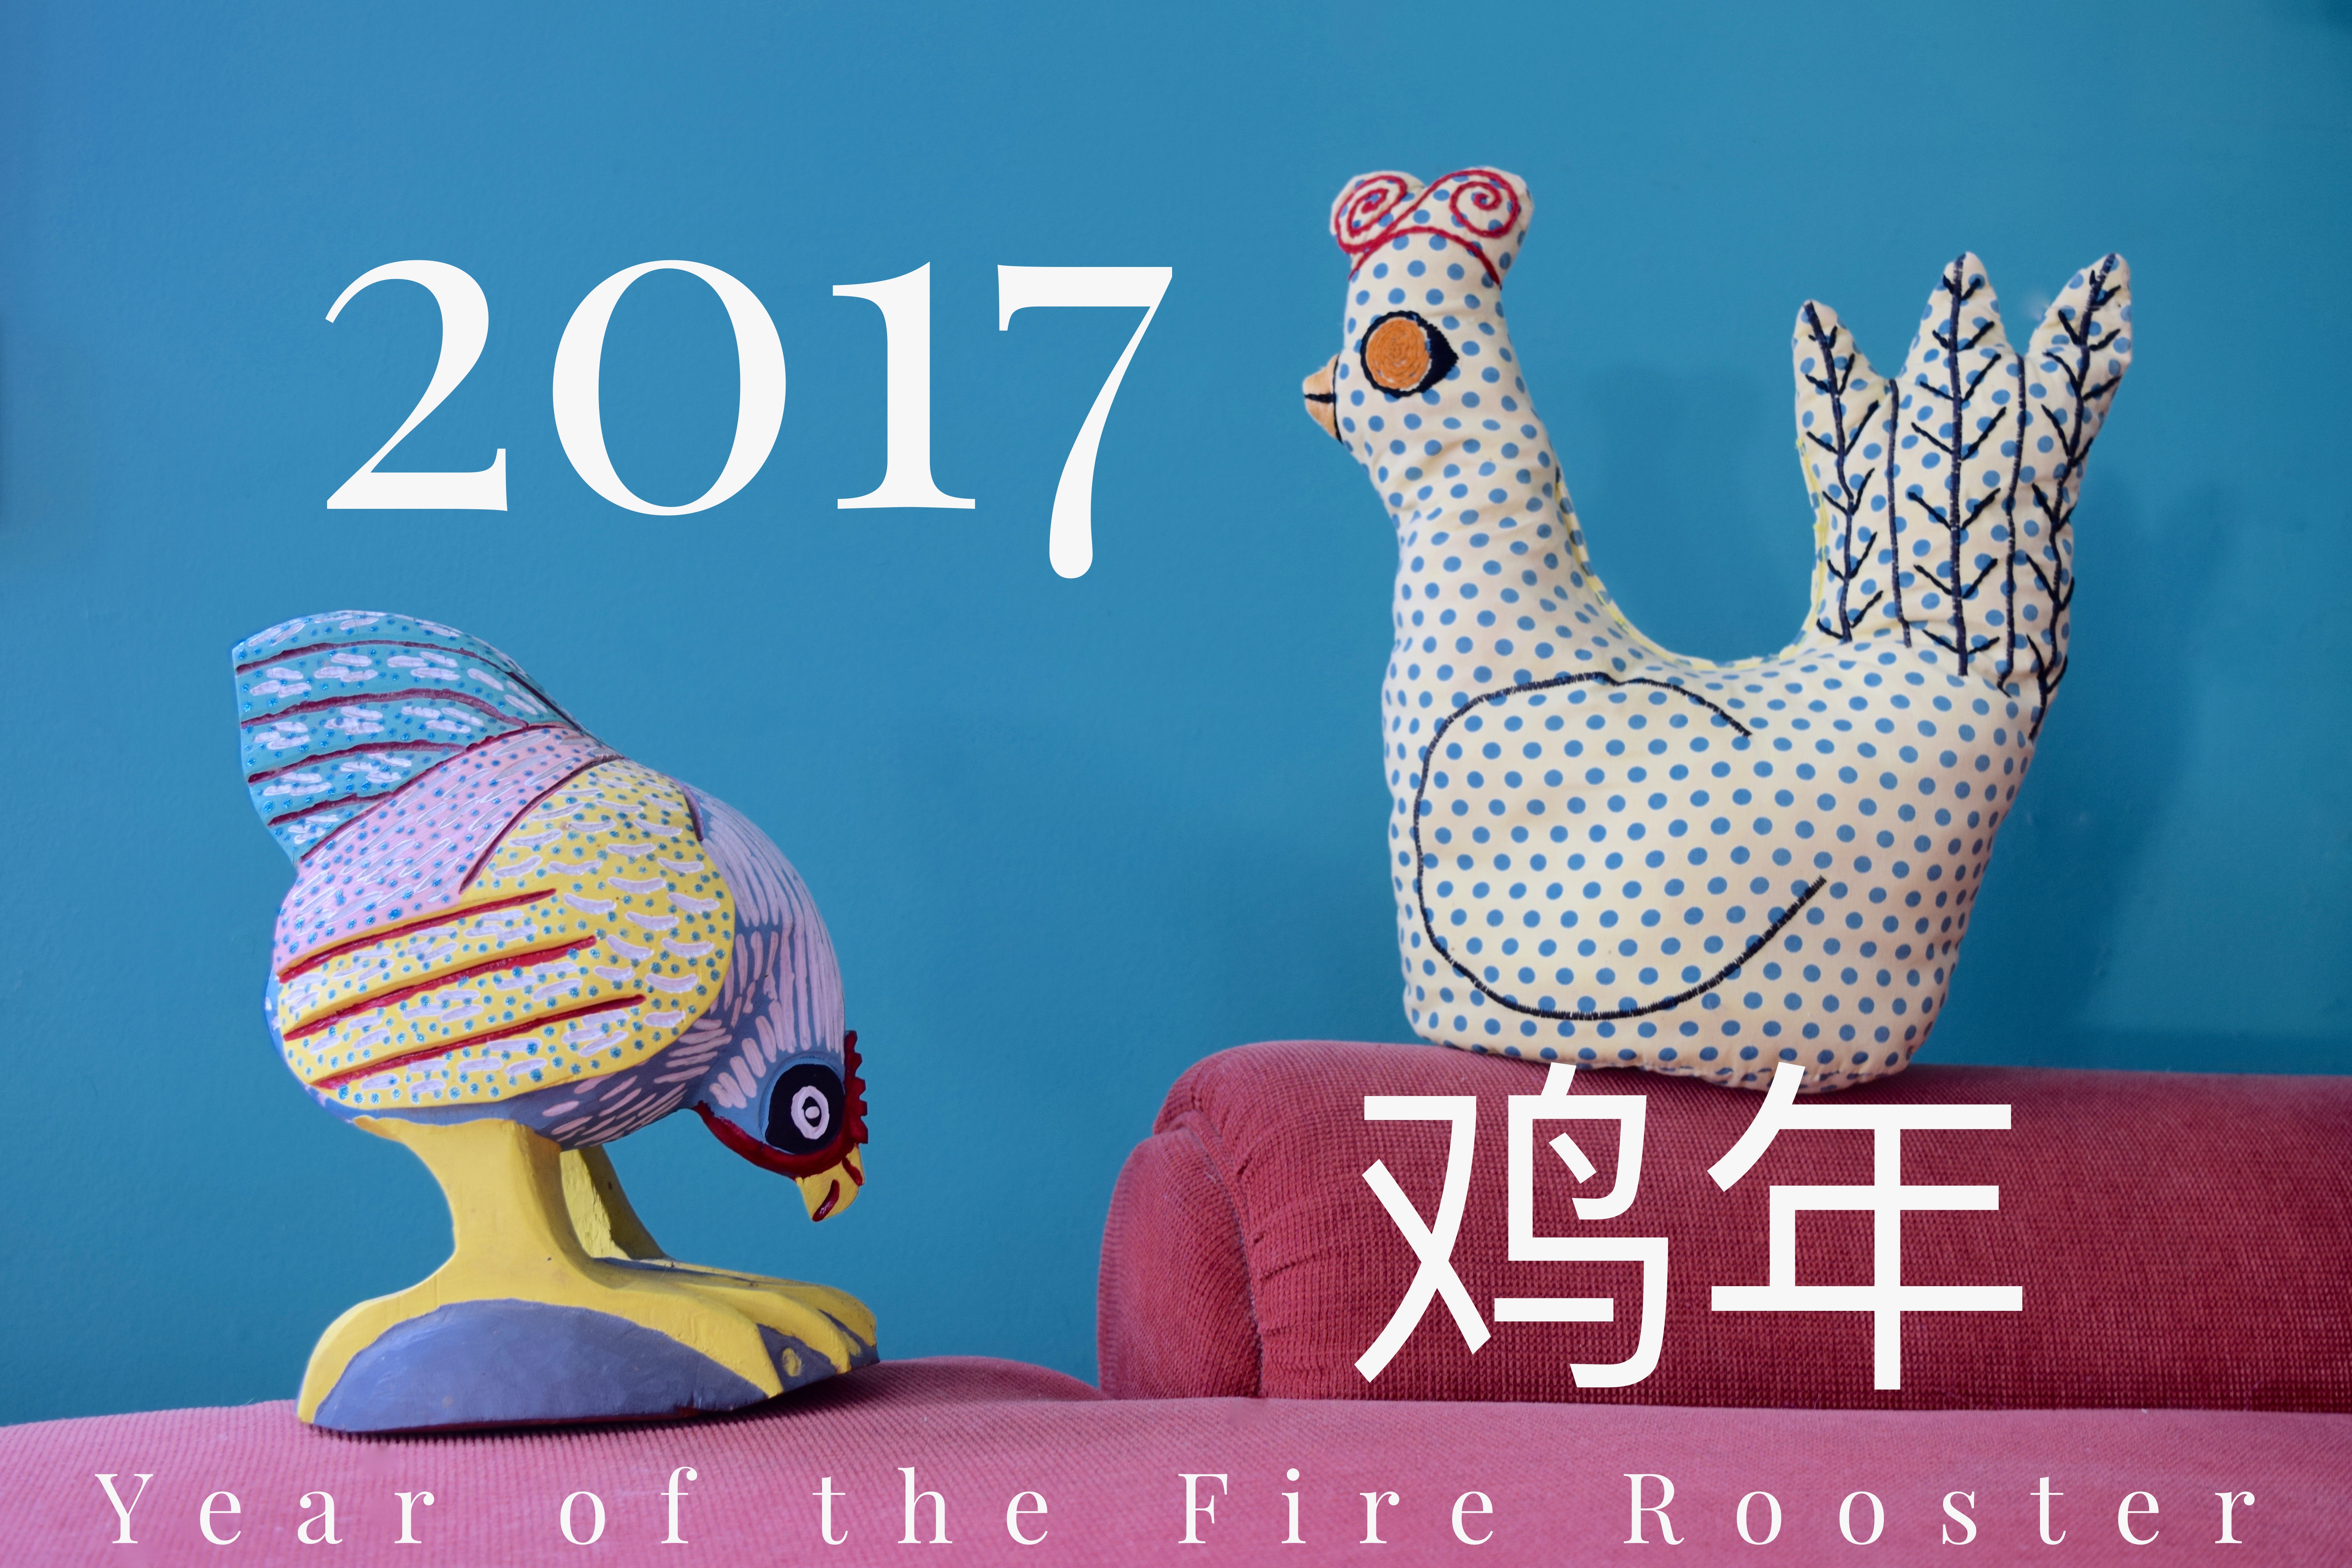 Fire Rooster Poster